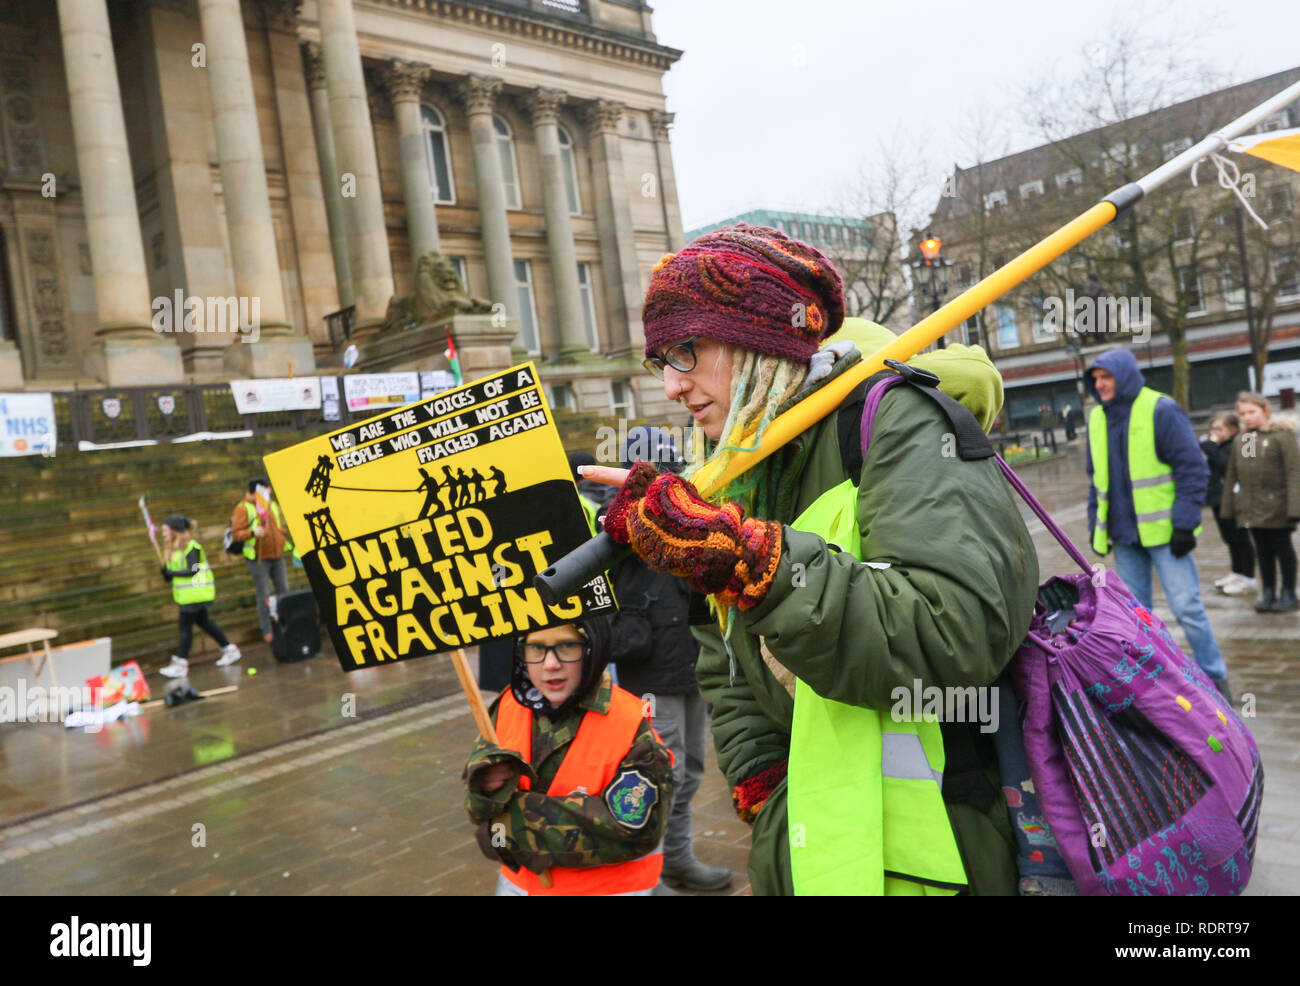 Bolton, UK. 19 January 2019. Bolton, Lancashire, UK. The Bolton Yellow Vest Protest saw a crowds f people in high-visibility jackets gather at 12.30pm on Saturday, January 19, in Victoria Square in front of the Town Hall in association with other rallies organised by The People's Assembly.  Leila Hassan and Sasha Roper are part of Stand Up To Racism Bolton, the group which is organising the rally. They take inspiration from the 'yellow vest' protests in France which have seen hundreds of thousands of people march against austerity policies in Paris.   Credit: Phil Taylor/Alamy Live News Stock Photo